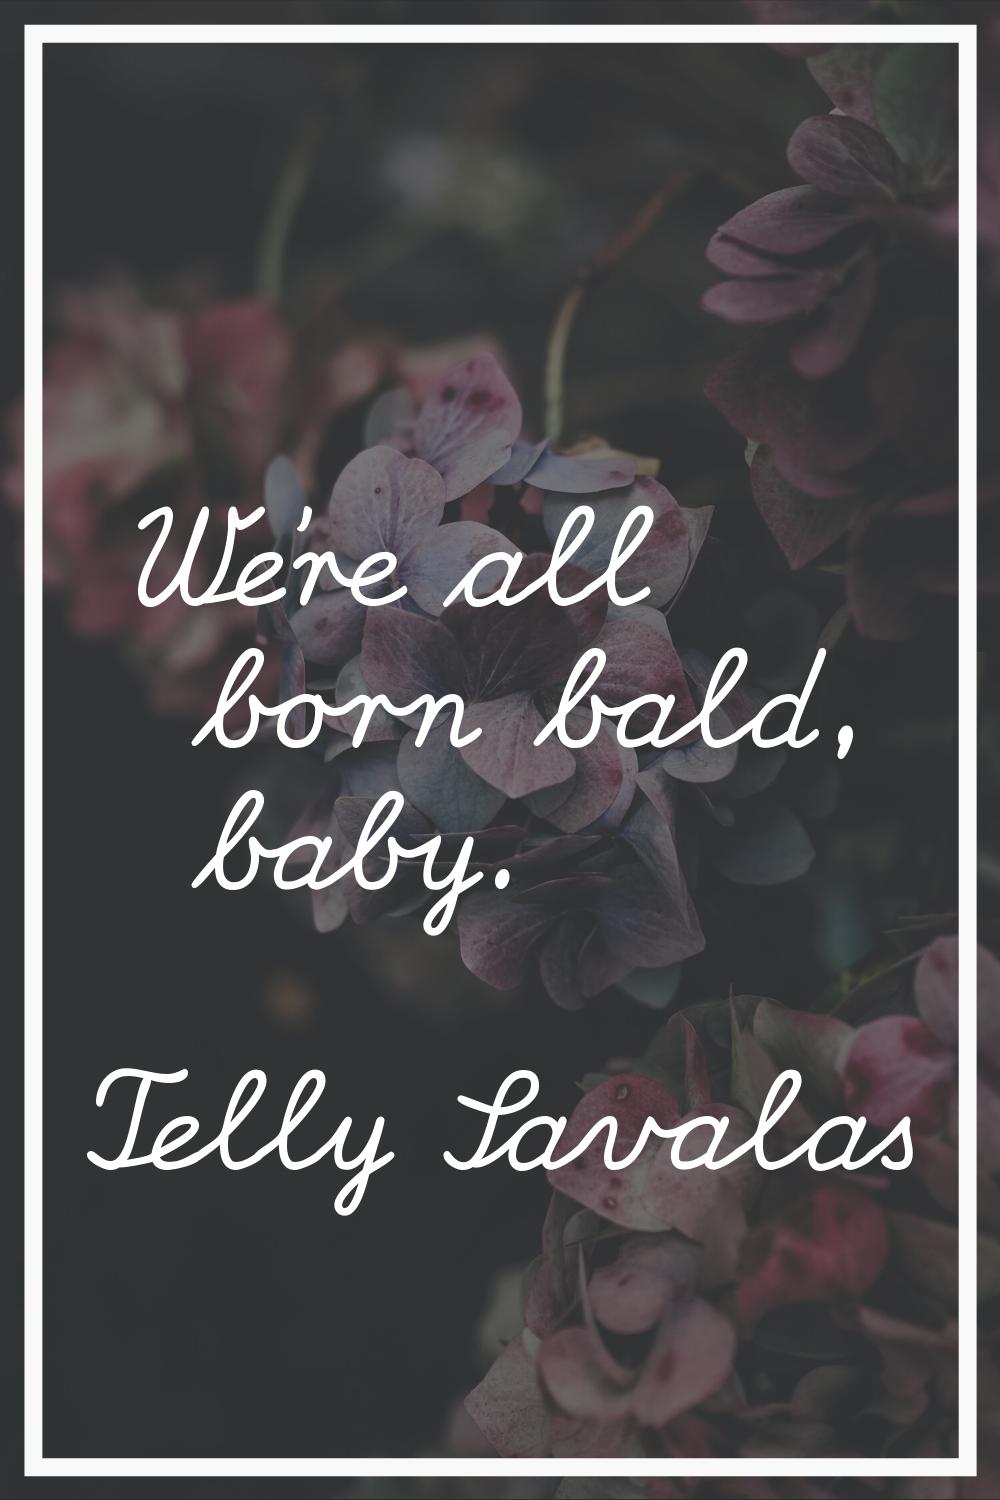 We're all born bald, baby.